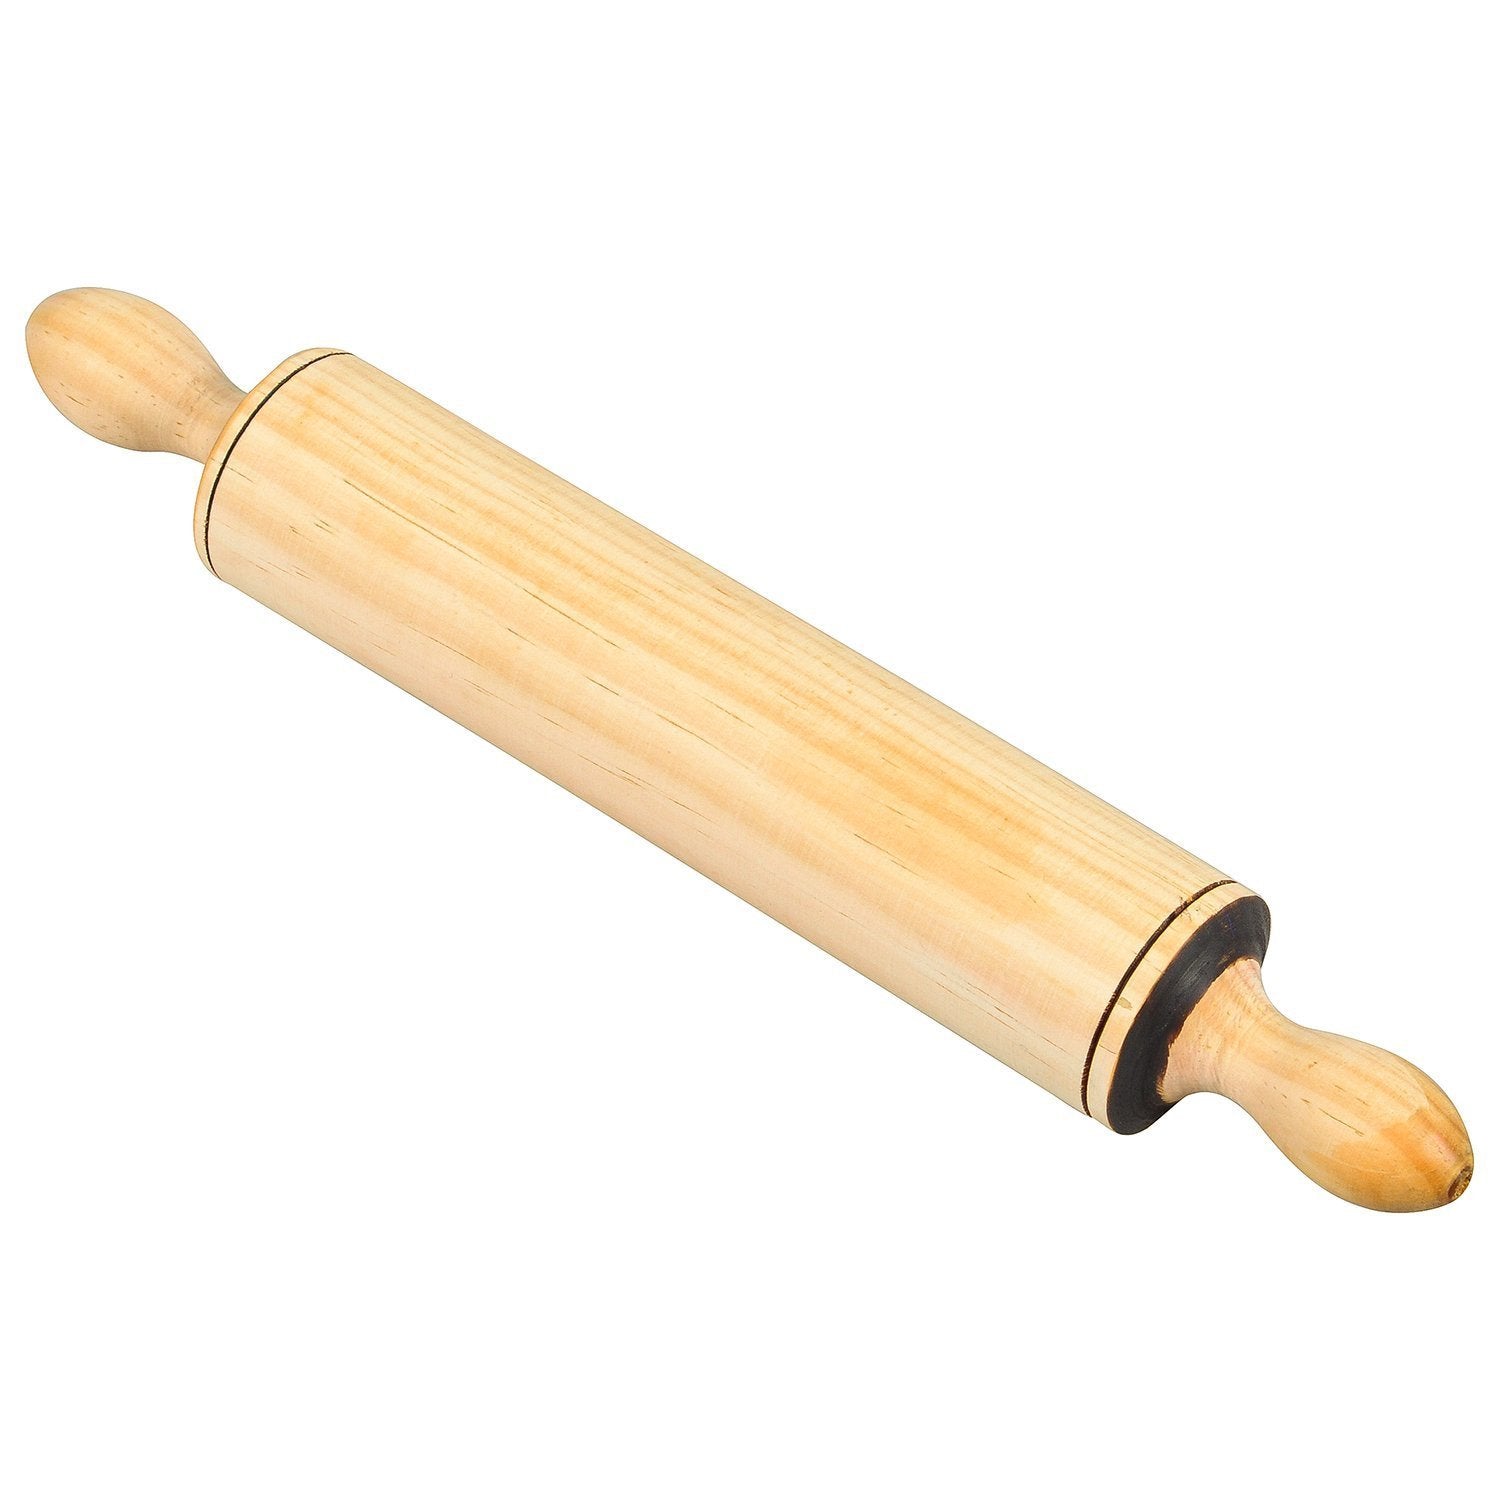 SOLID WOOD DOUGH ROLLER, MEXICAN TORTILLA ROLLING PIN RODILLO